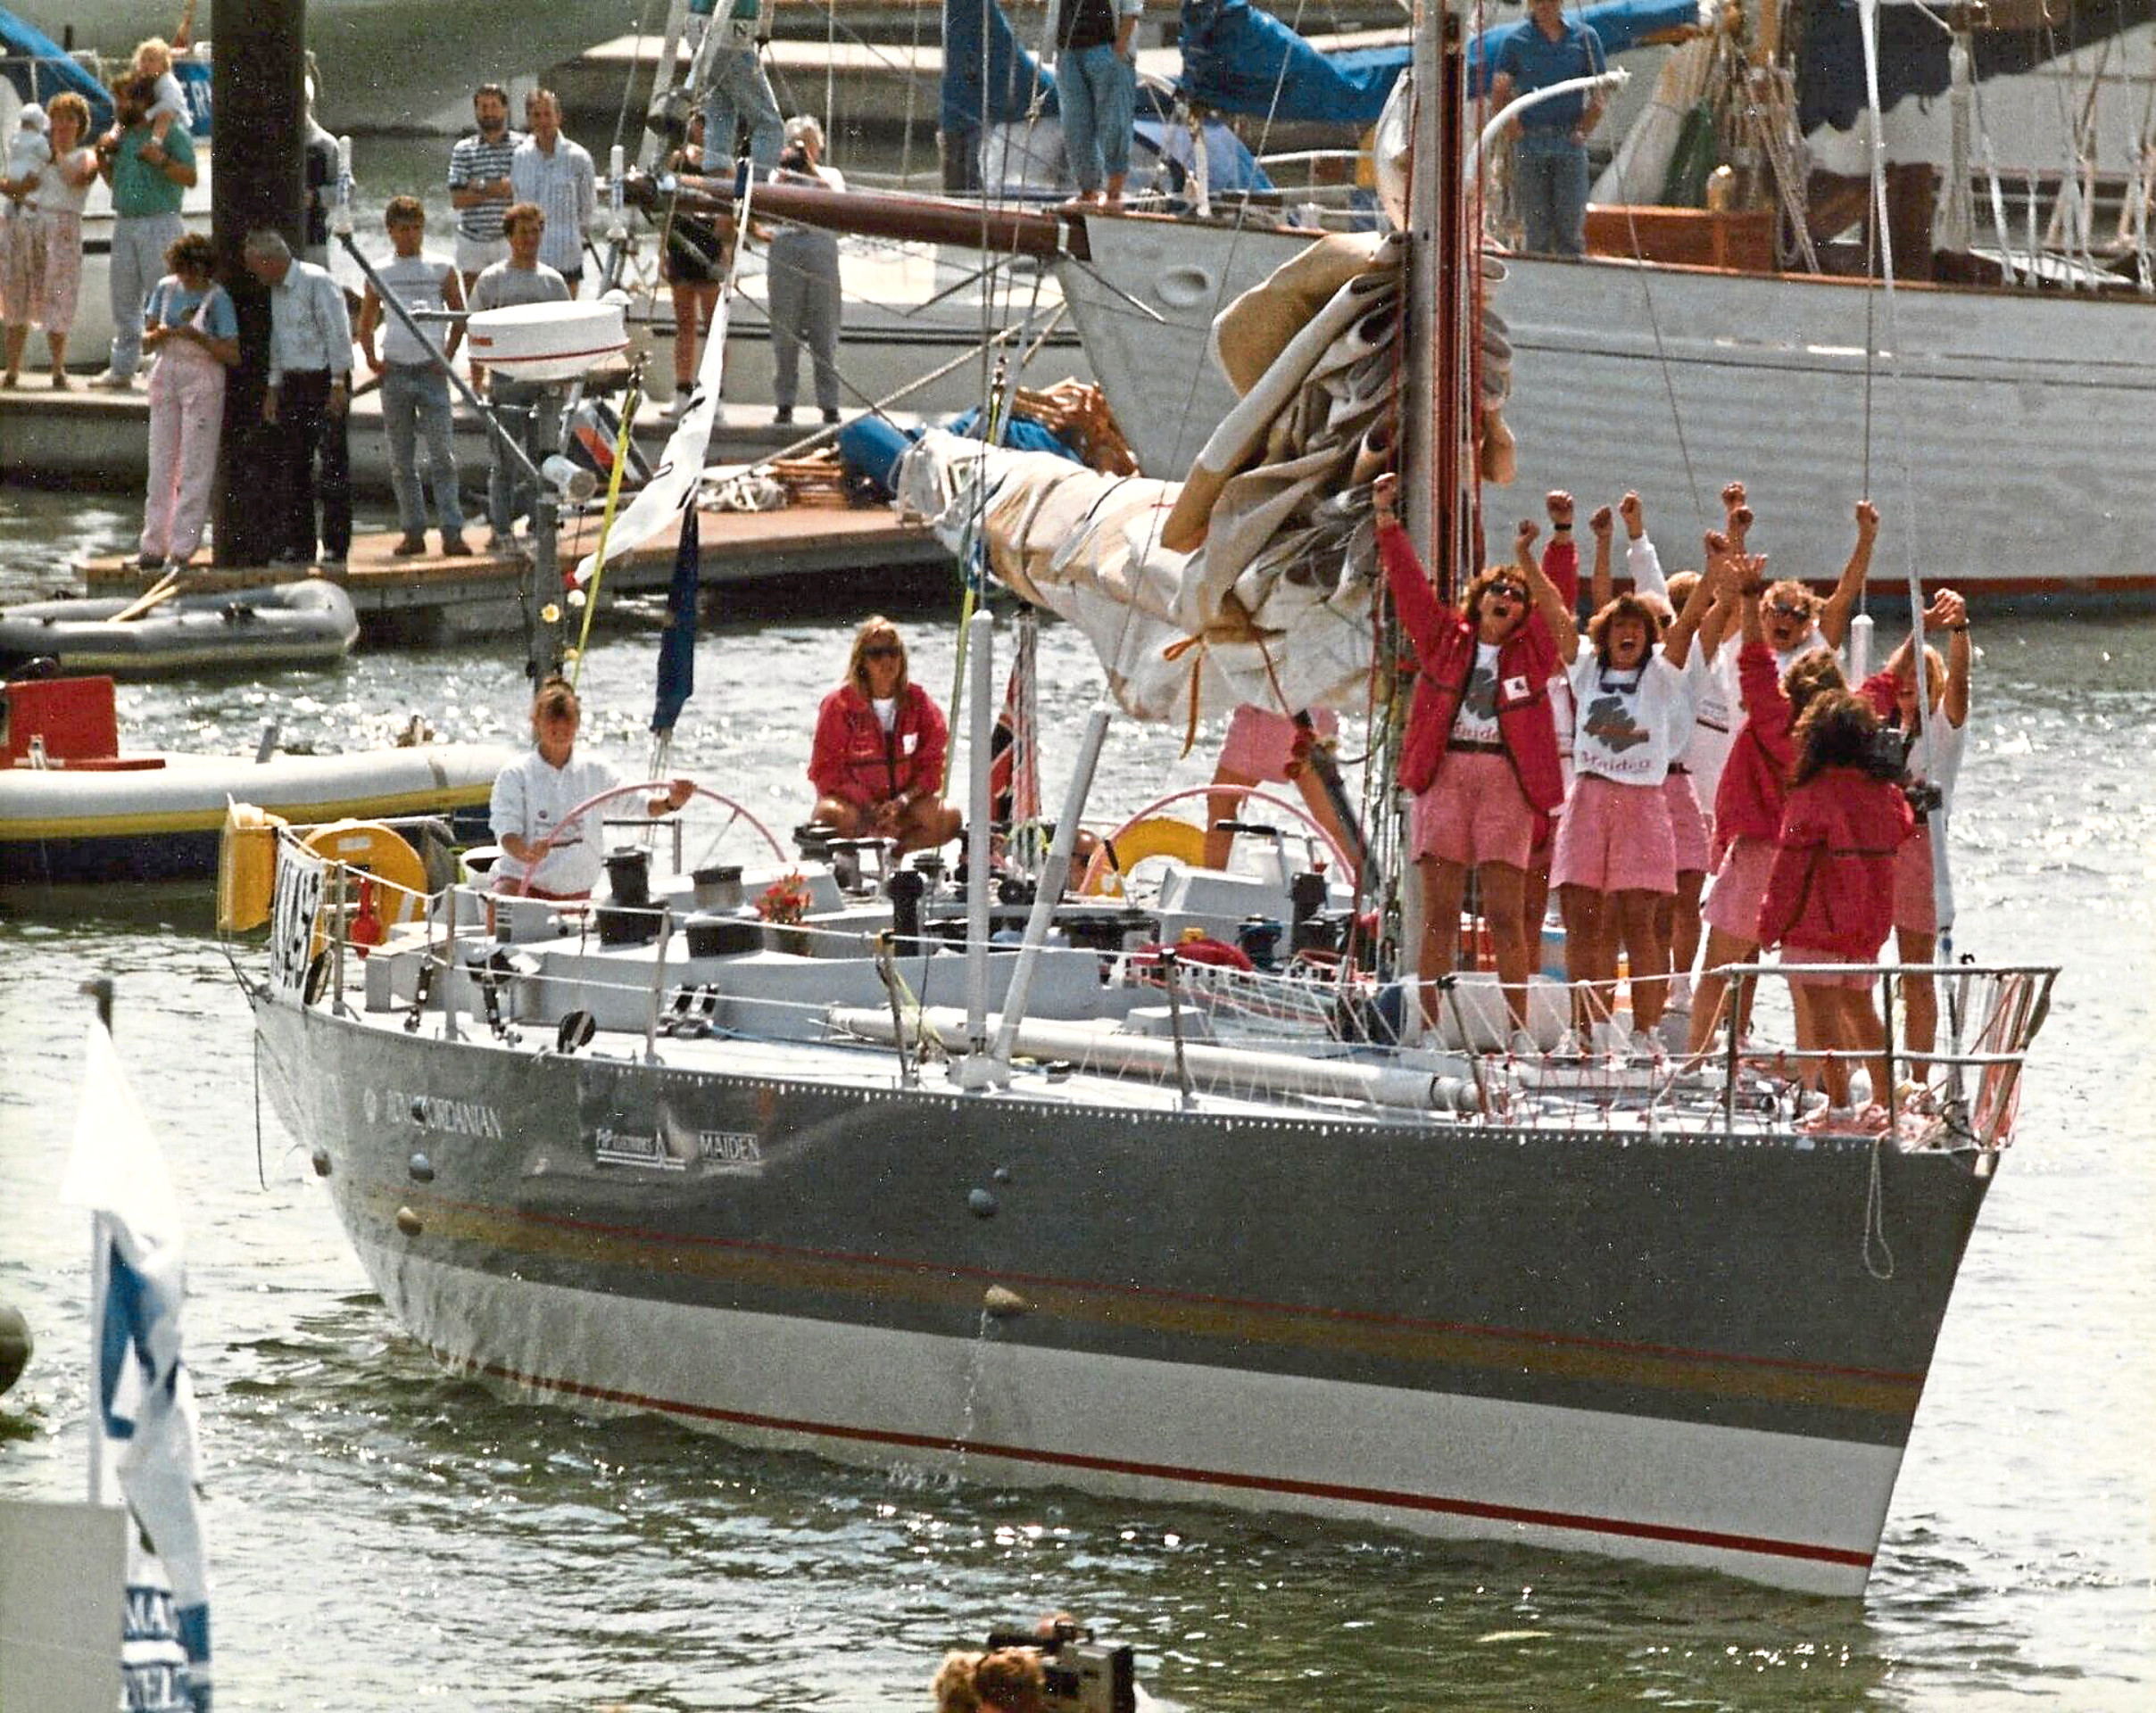 The crew who sailed around the world on the Maiden in 1989.